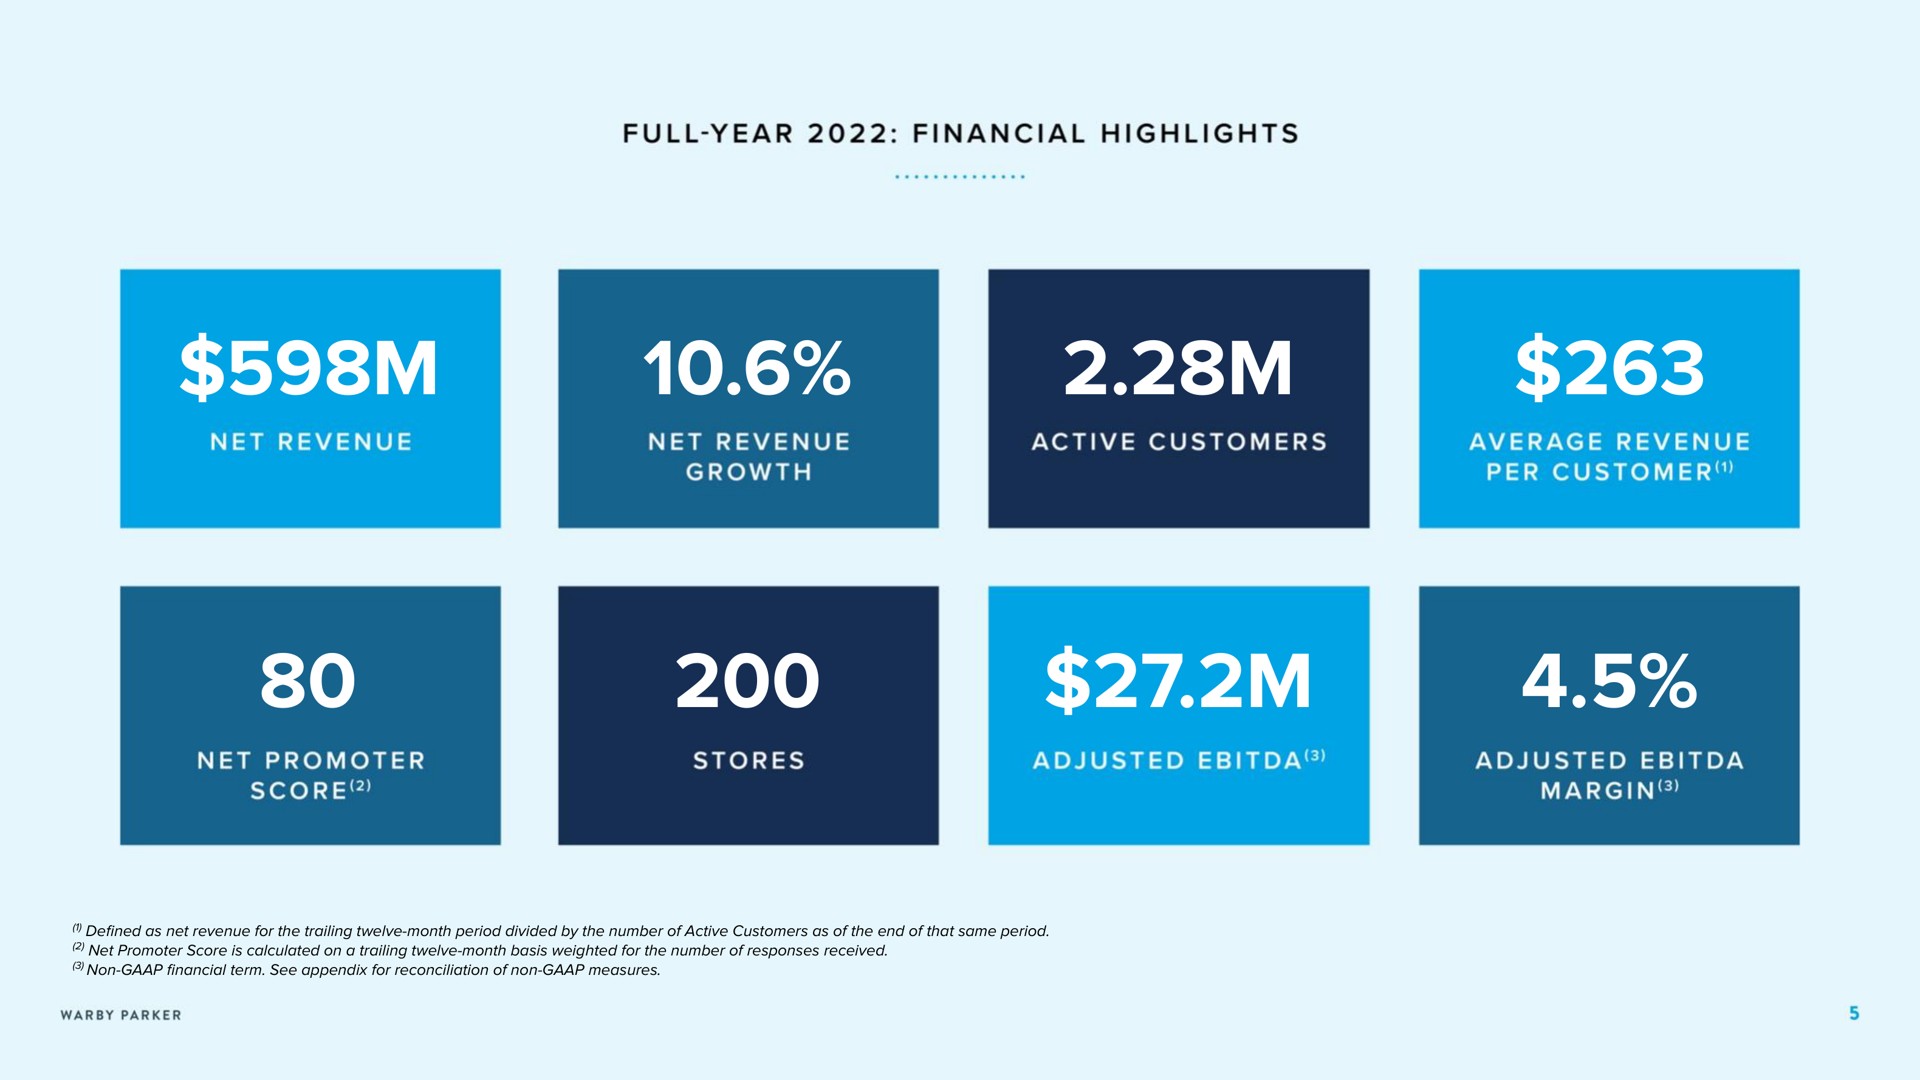 full year financial highlights average revenue per customer so | Warby Parker